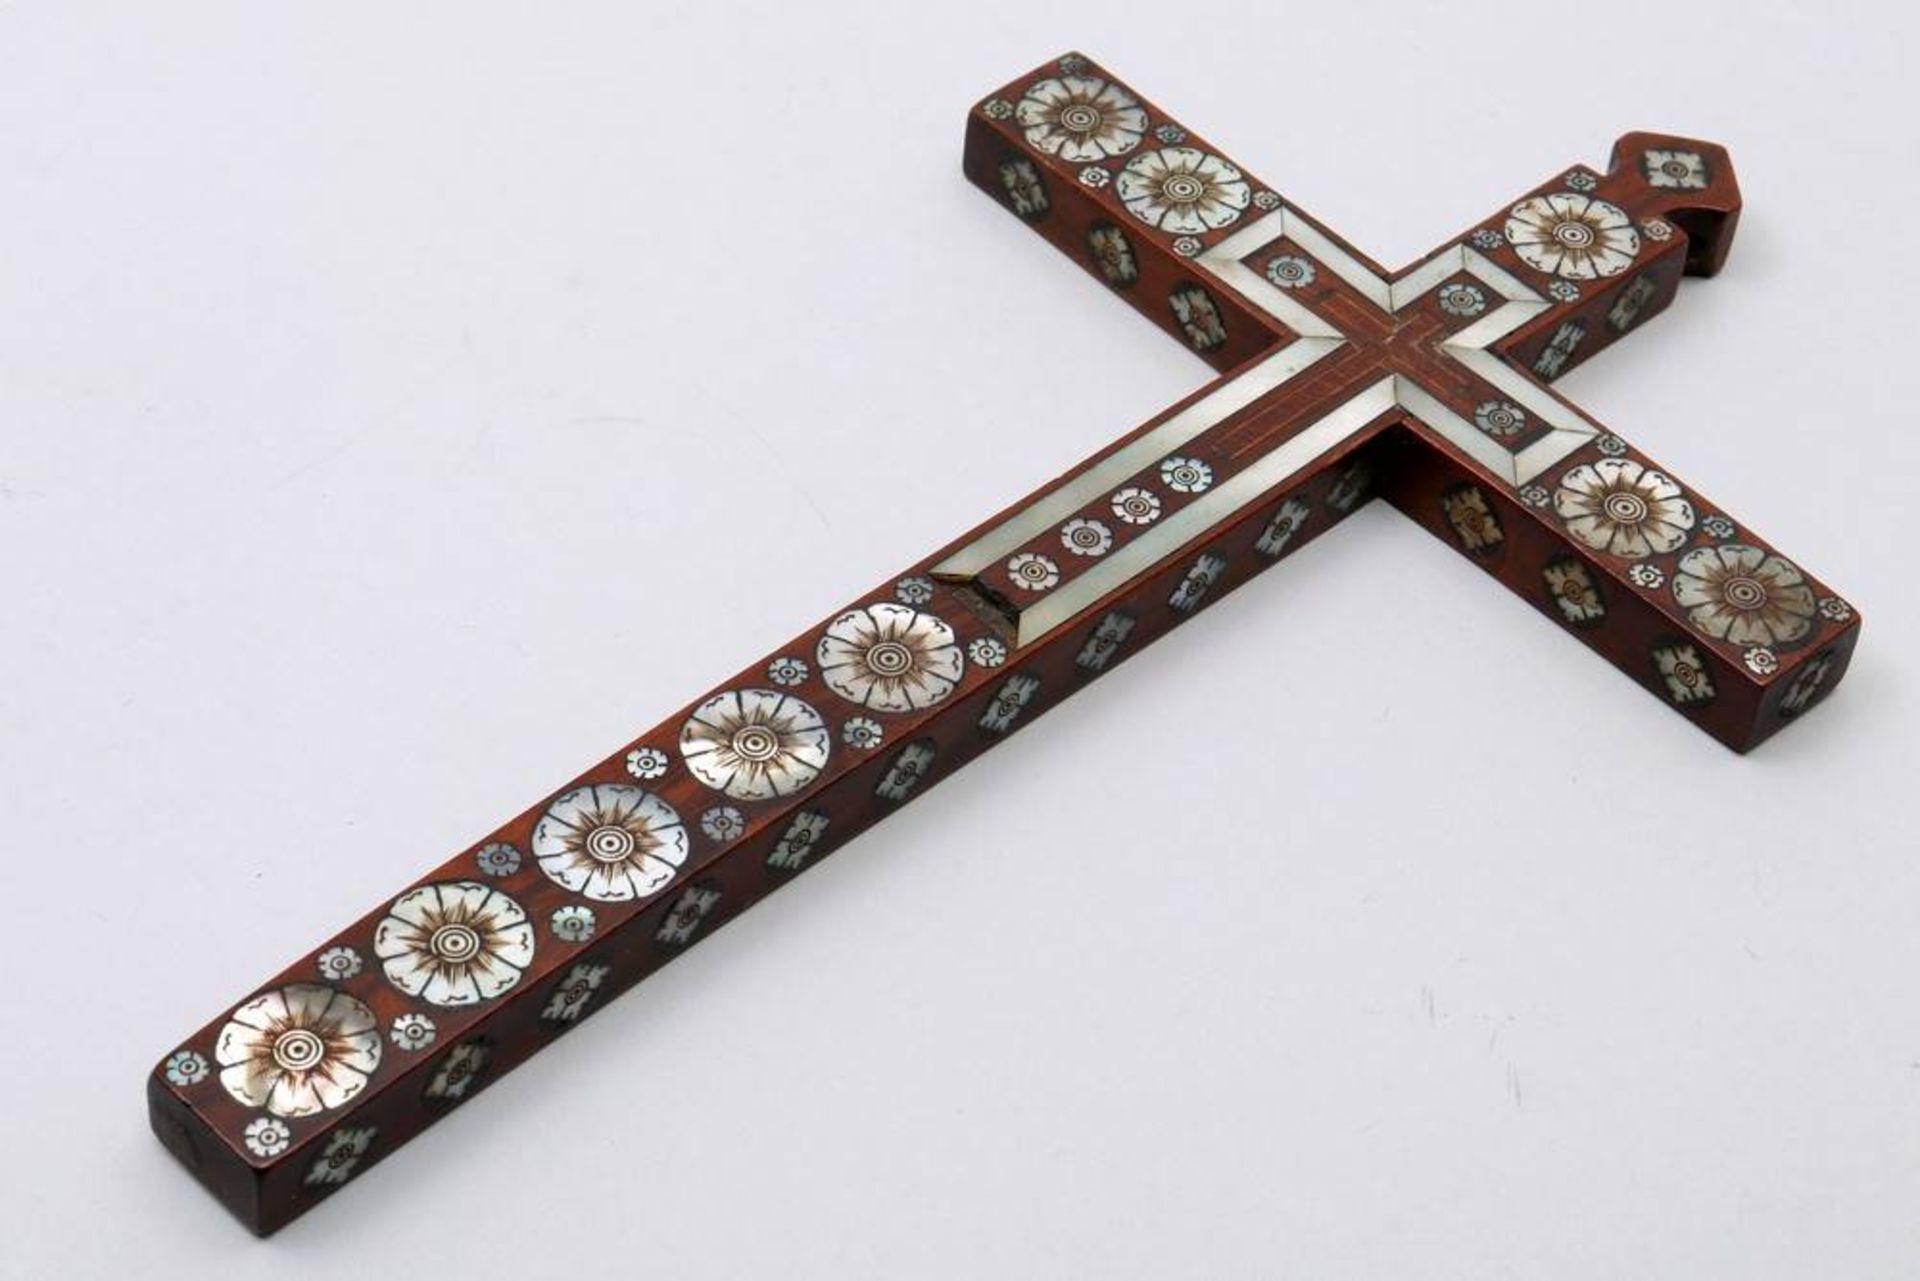 Cruzifixposs. south german, 18th/19th C., walnut, inlaid with mother of pearl ornaments, HxB: 20,